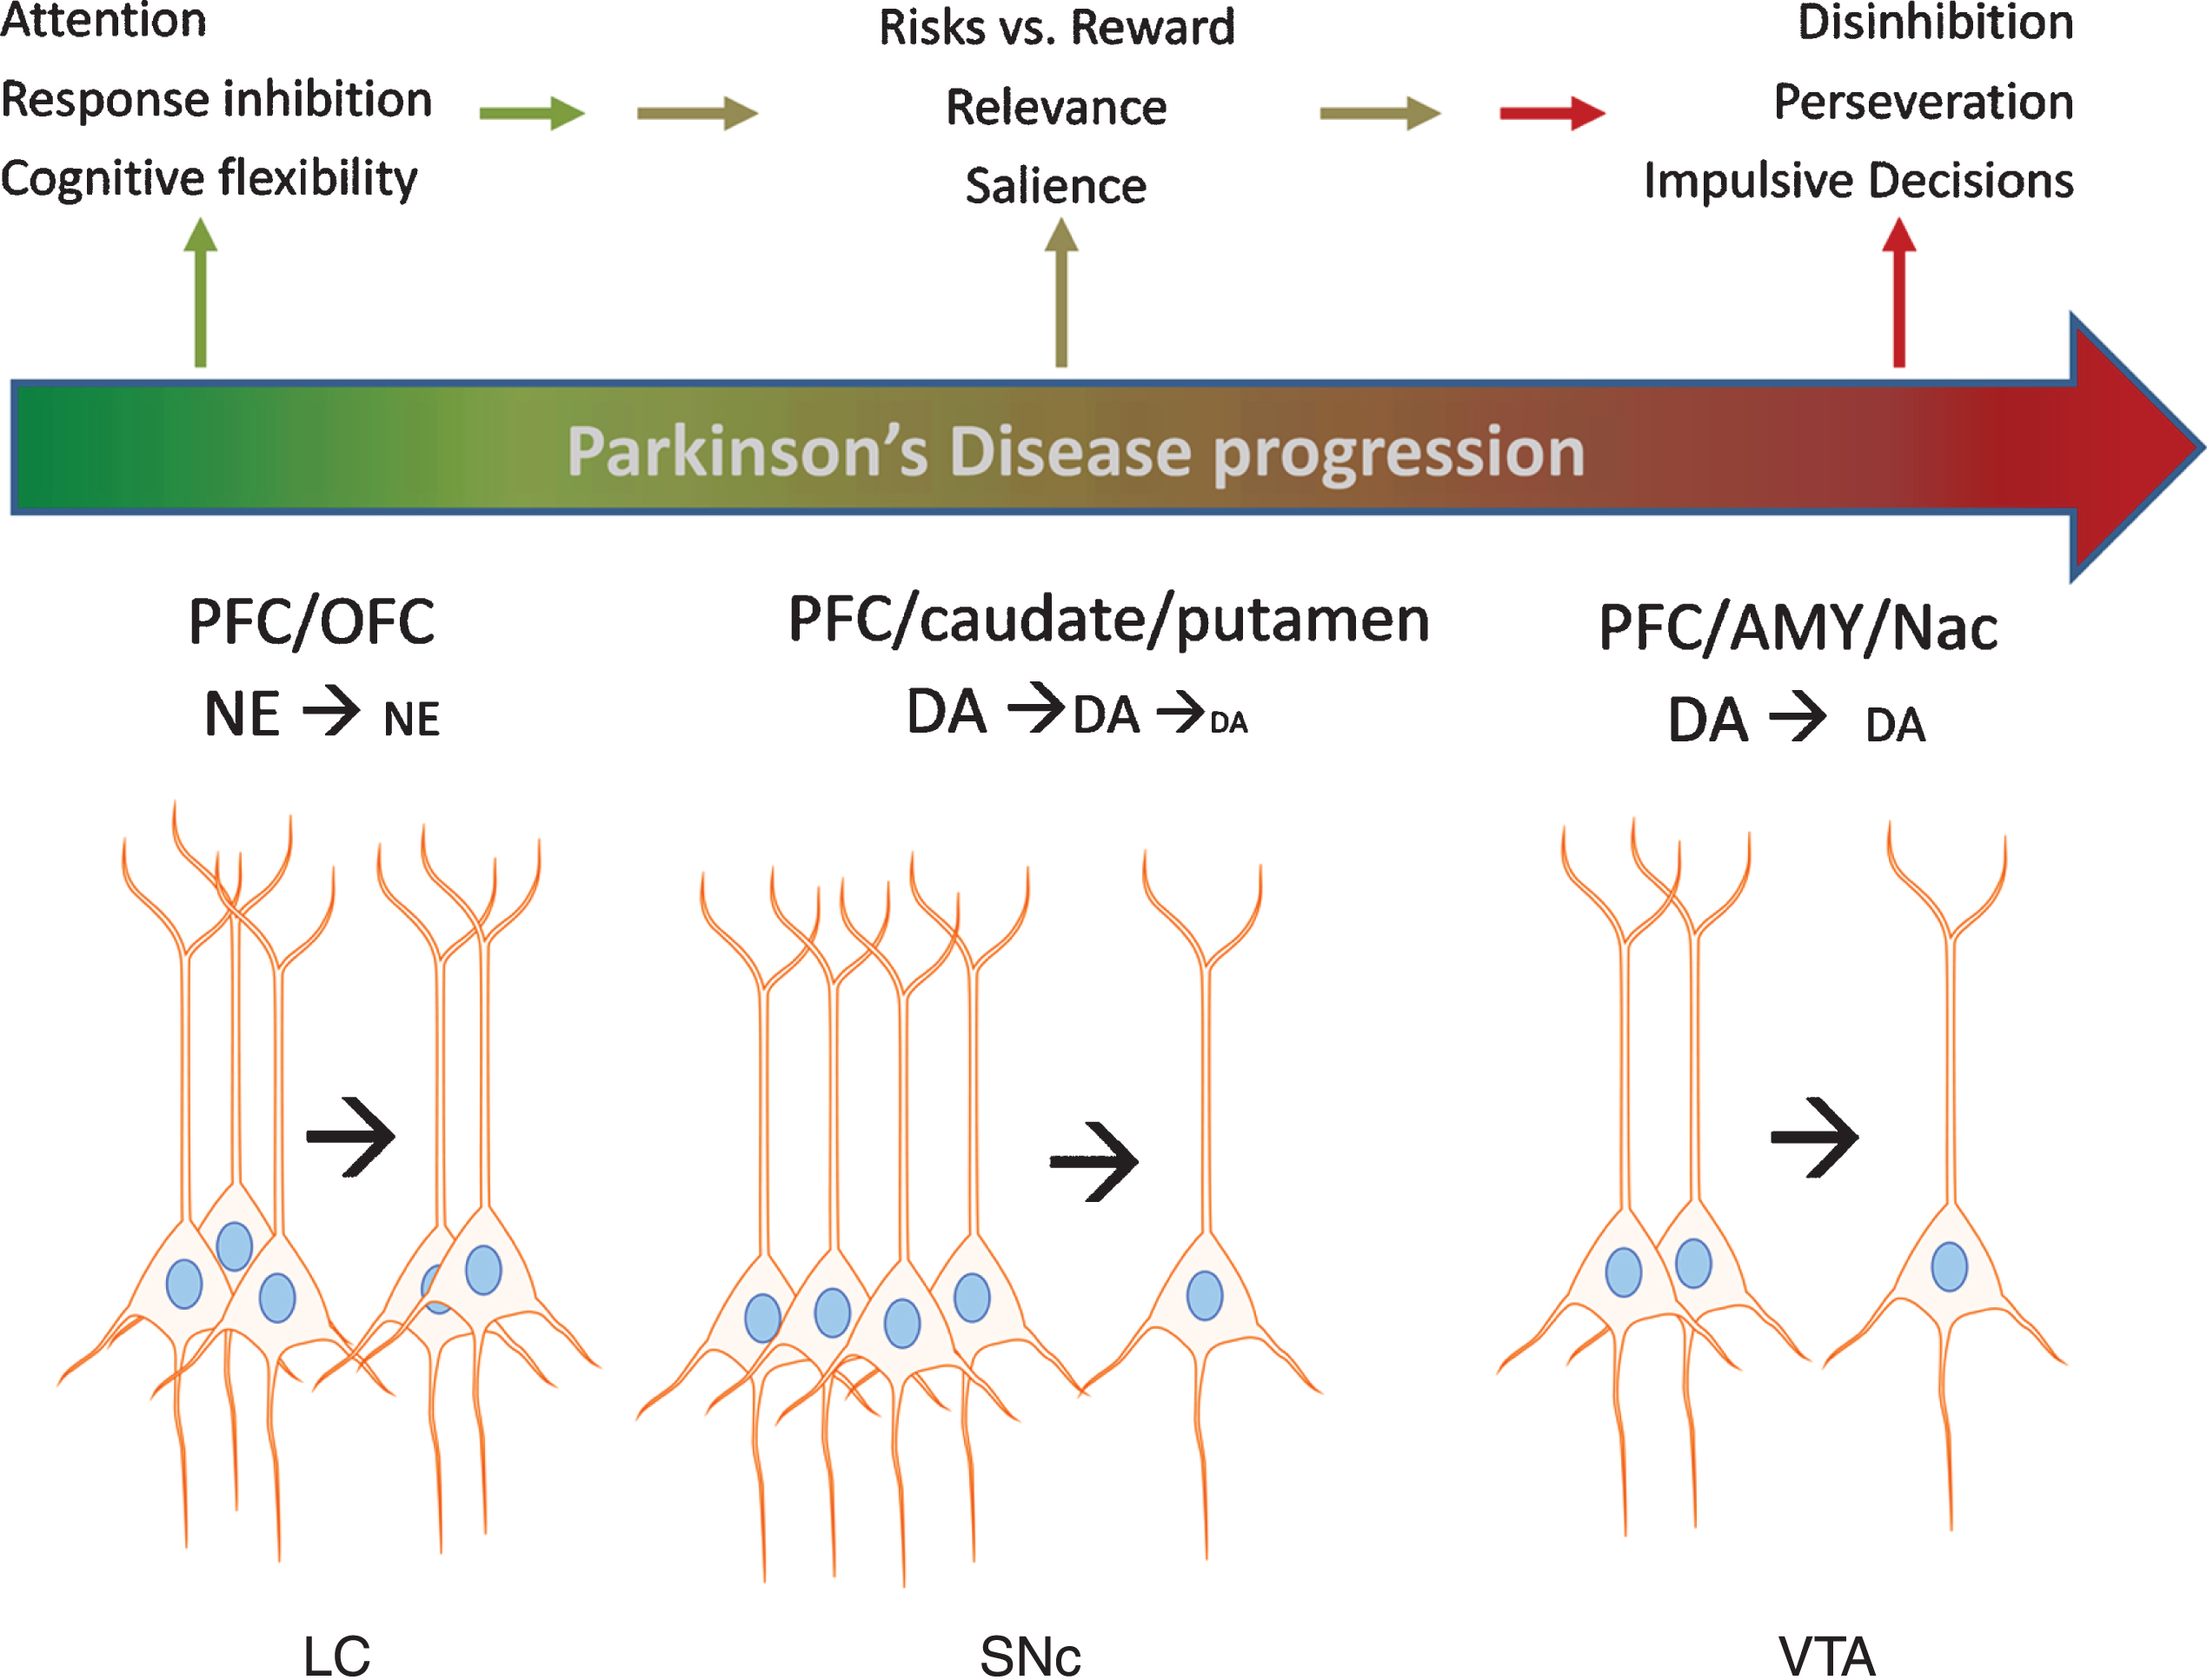 Impact of catecholamine cell body loss in Parkinson’s disease on noradrenergic and dopaminergic signaling in cortical and subcortical regions and executive functions. A schematic of Parkinson’s progression is presented by the arrow, wherein intact functions (green color) in executive function (EF) are subserved by an intact population of cell bodies to the left of the arrow for each cell body region depicted; locus ceruleus (LC), substantia nigra pars compacta (SNc), and ventral tegmental area (VTA). As loss of these neurons begins at the early (and likely prodromal) stages of the disease (depicted in color by transition between green and red in the Parkinson’s progression arrow), progressively less neurotransmitter (norepinephrine (NE) and dopamine (DA)) is released in the targeted cortical (prefrontal (PFC) and orbitofrontal (OFC)) and subcortical (caudate, putamen, amygdala (AMY), and nucleus accumbens (NAc)) regions. In turn, these deficits in NE and DA release lead to deficits in EF, including decreased ability to inhibit choices that lead to disadvantageous outcomes, impaired attention to relevant stimuli associated with advantageous outcomes, impairment in recognizing reward saliency, and perseveration in decision-making that leads to disadvantageous outcomes.